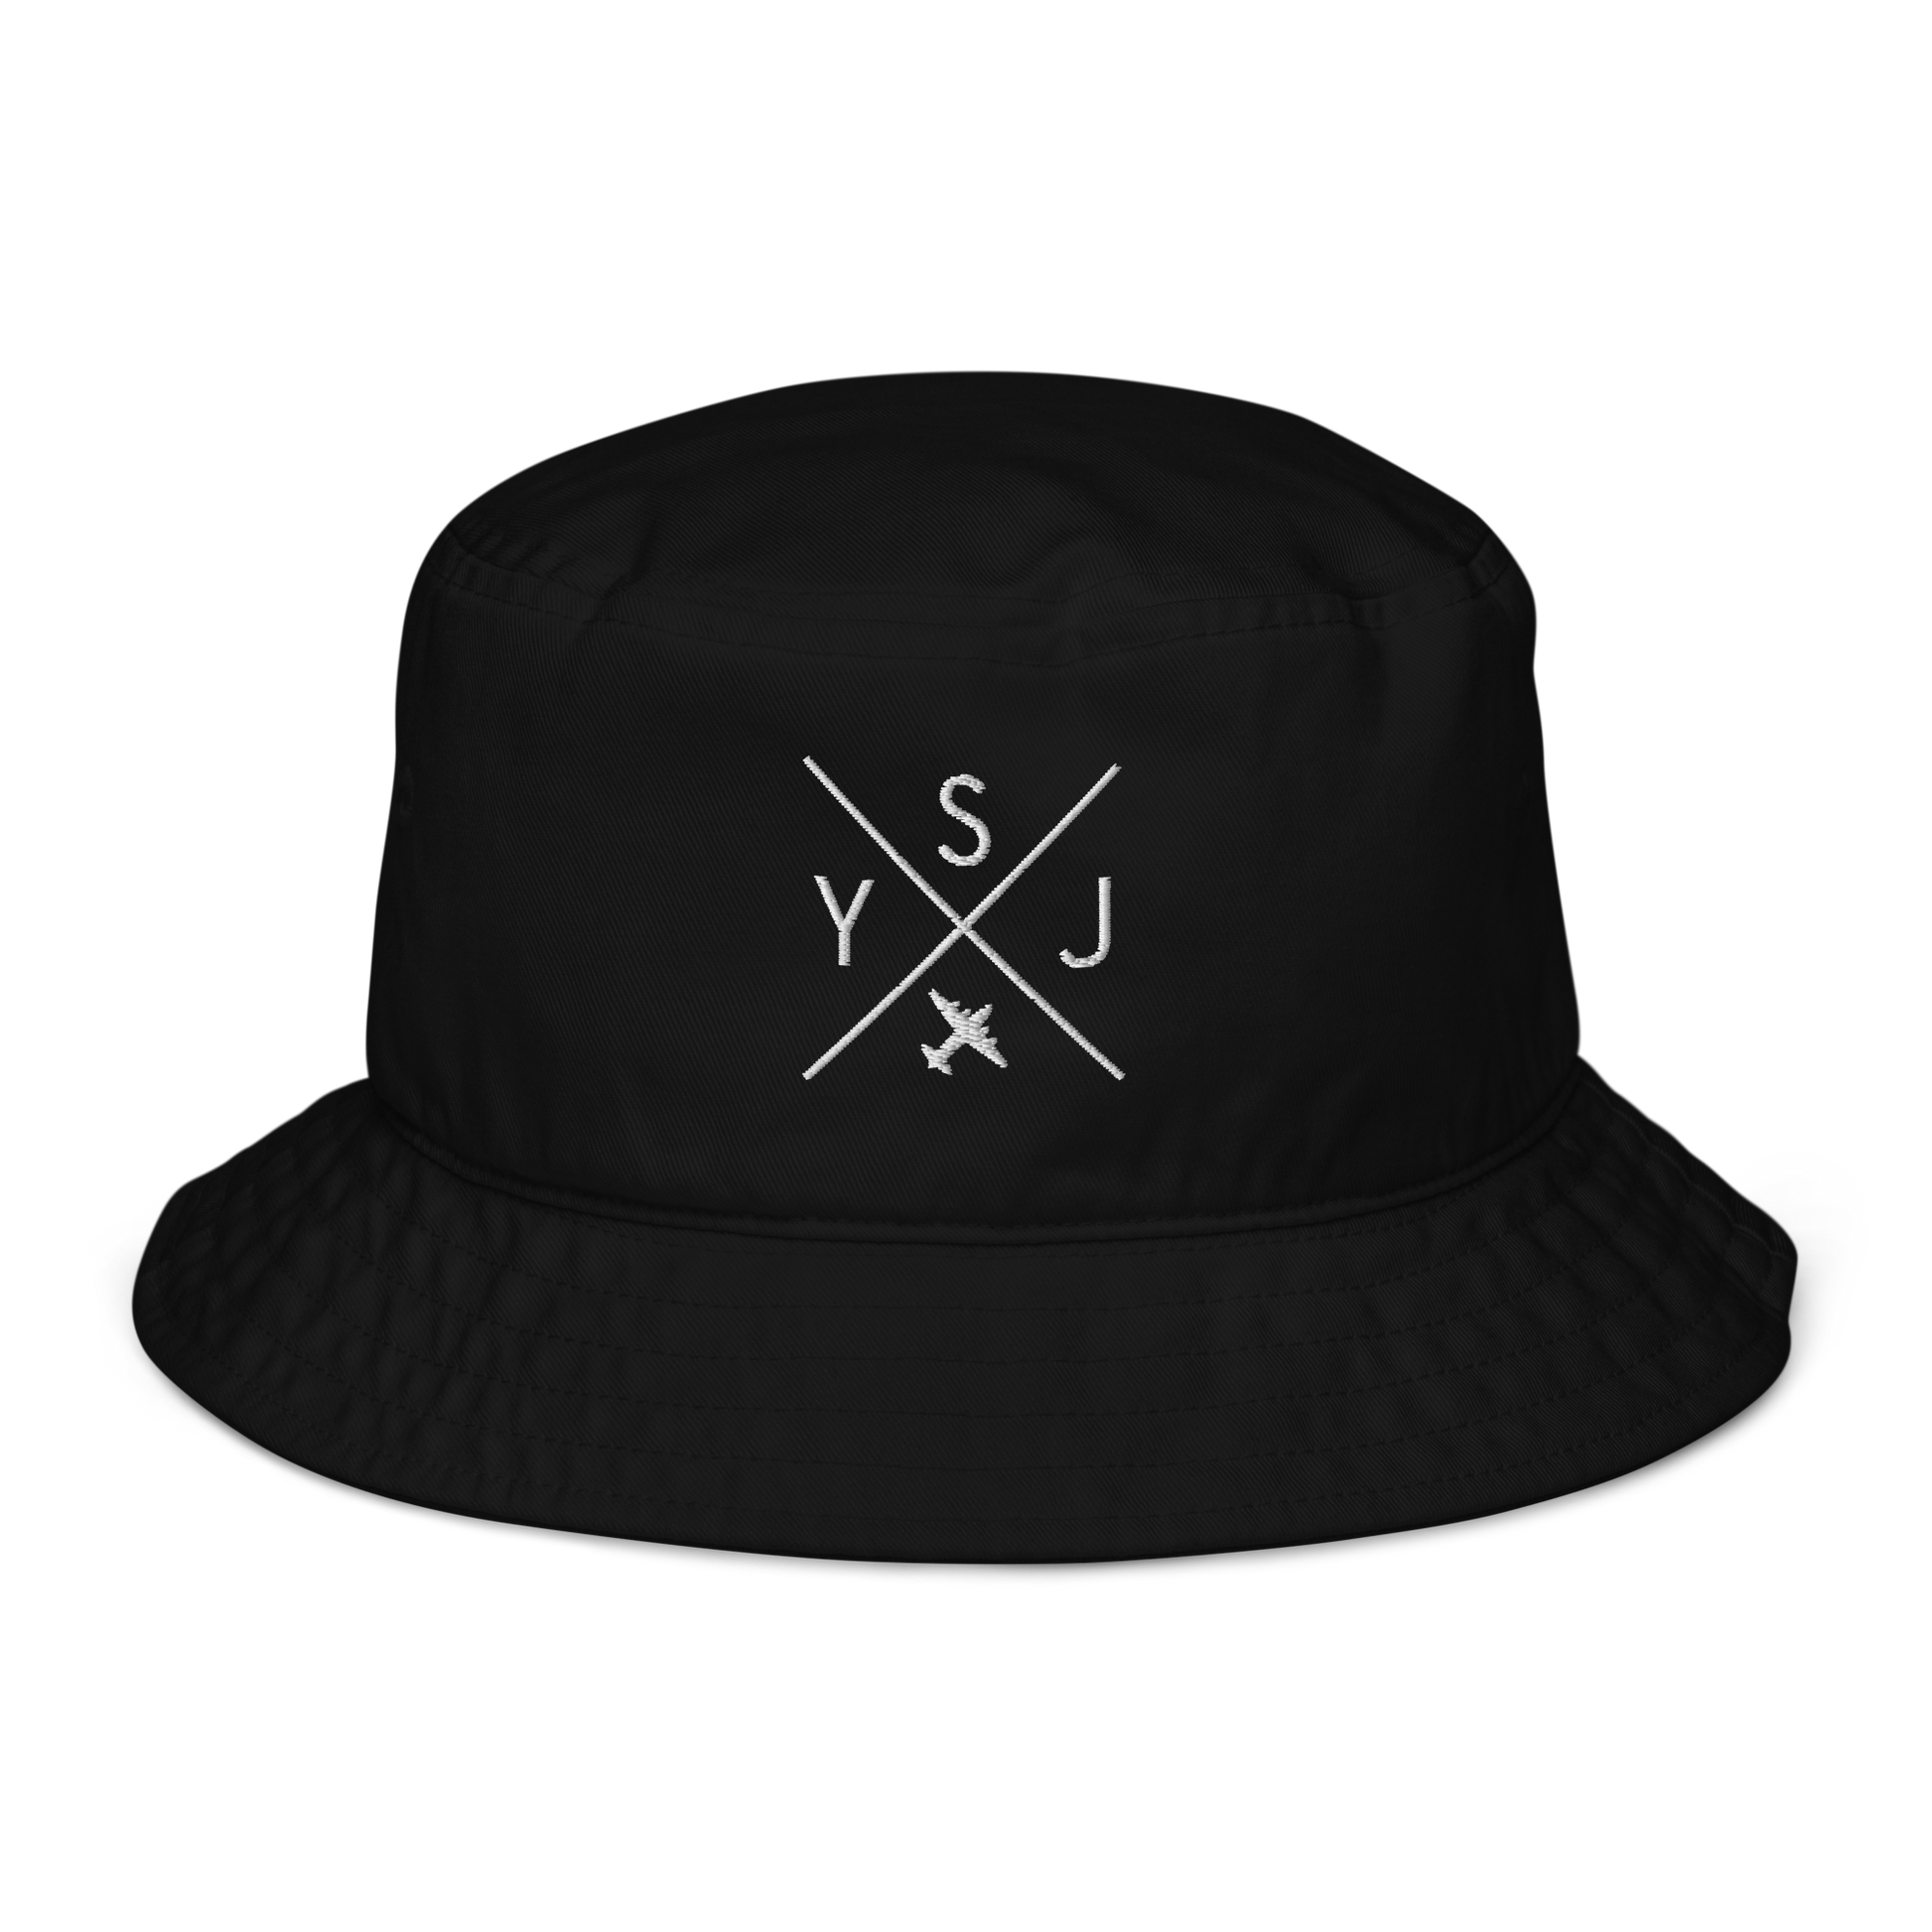 YHM Designs - YSJ Saint John Organic Cotton Bucket Hat - Crossed-X Design with Airport Code and Vintage Propliner - White Embroidery - Image 01